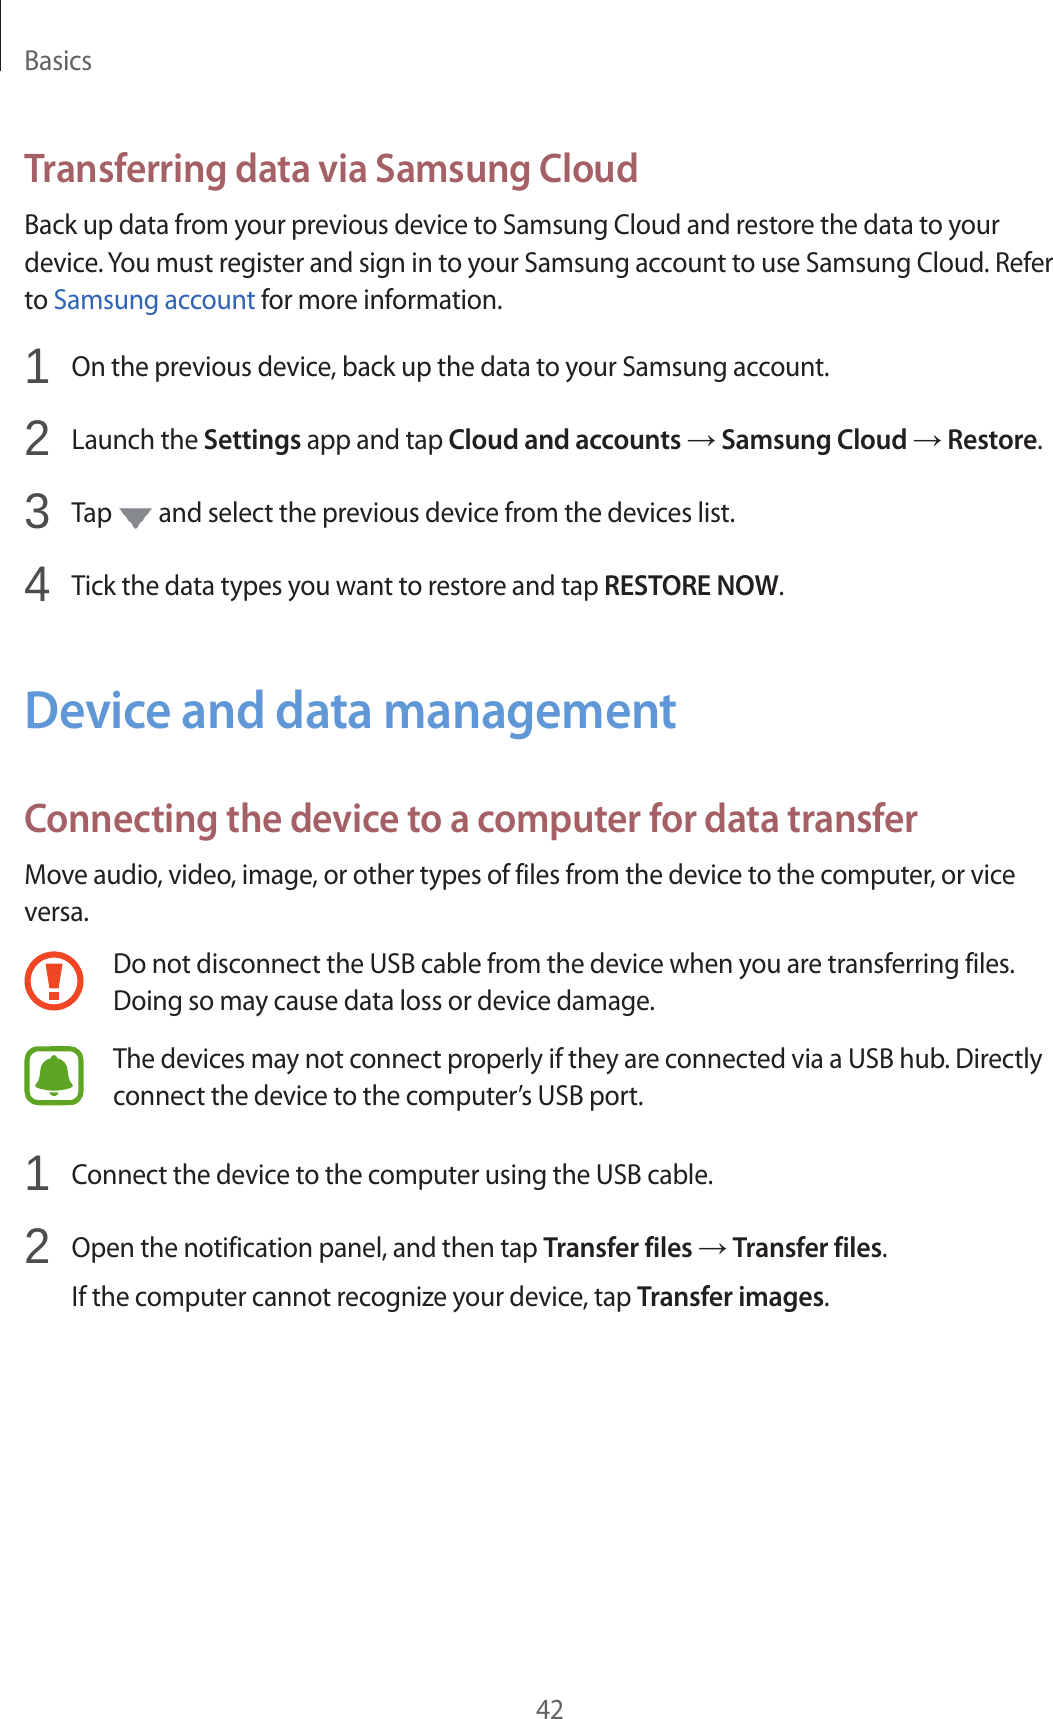 Basics42Transferring data via Samsung CloudBack up data from your previous device to Samsung Cloud and restore the data to your device. You must register and sign in to your Samsung account to use Samsung Cloud. Refer to Samsung account for more information.1  On the previous device, back up the data to your Samsung account.2  Launch the Settings app and tap Cloud and accounts → Samsung Cloud → Restore.3  Tap   and select the previous device from the devices list.4  Tick the data types you want to restore and tap RESTORE NOW.Device and data managementConnecting the device to a computer for data transferMove audio, video, image, or other types of files from the device to the computer, or vice versa.Do not disconnect the USB cable from the device when you are transferring files. Doing so may cause data loss or device damage.The devices may not connect properly if they are connected via a USB hub. Directly connect the device to the computer’s USB port.1  Connect the device to the computer using the USB cable.2  Open the notification panel, and then tap Transfer files → Transfer files.If the computer cannot recognize your device, tap Transfer images.